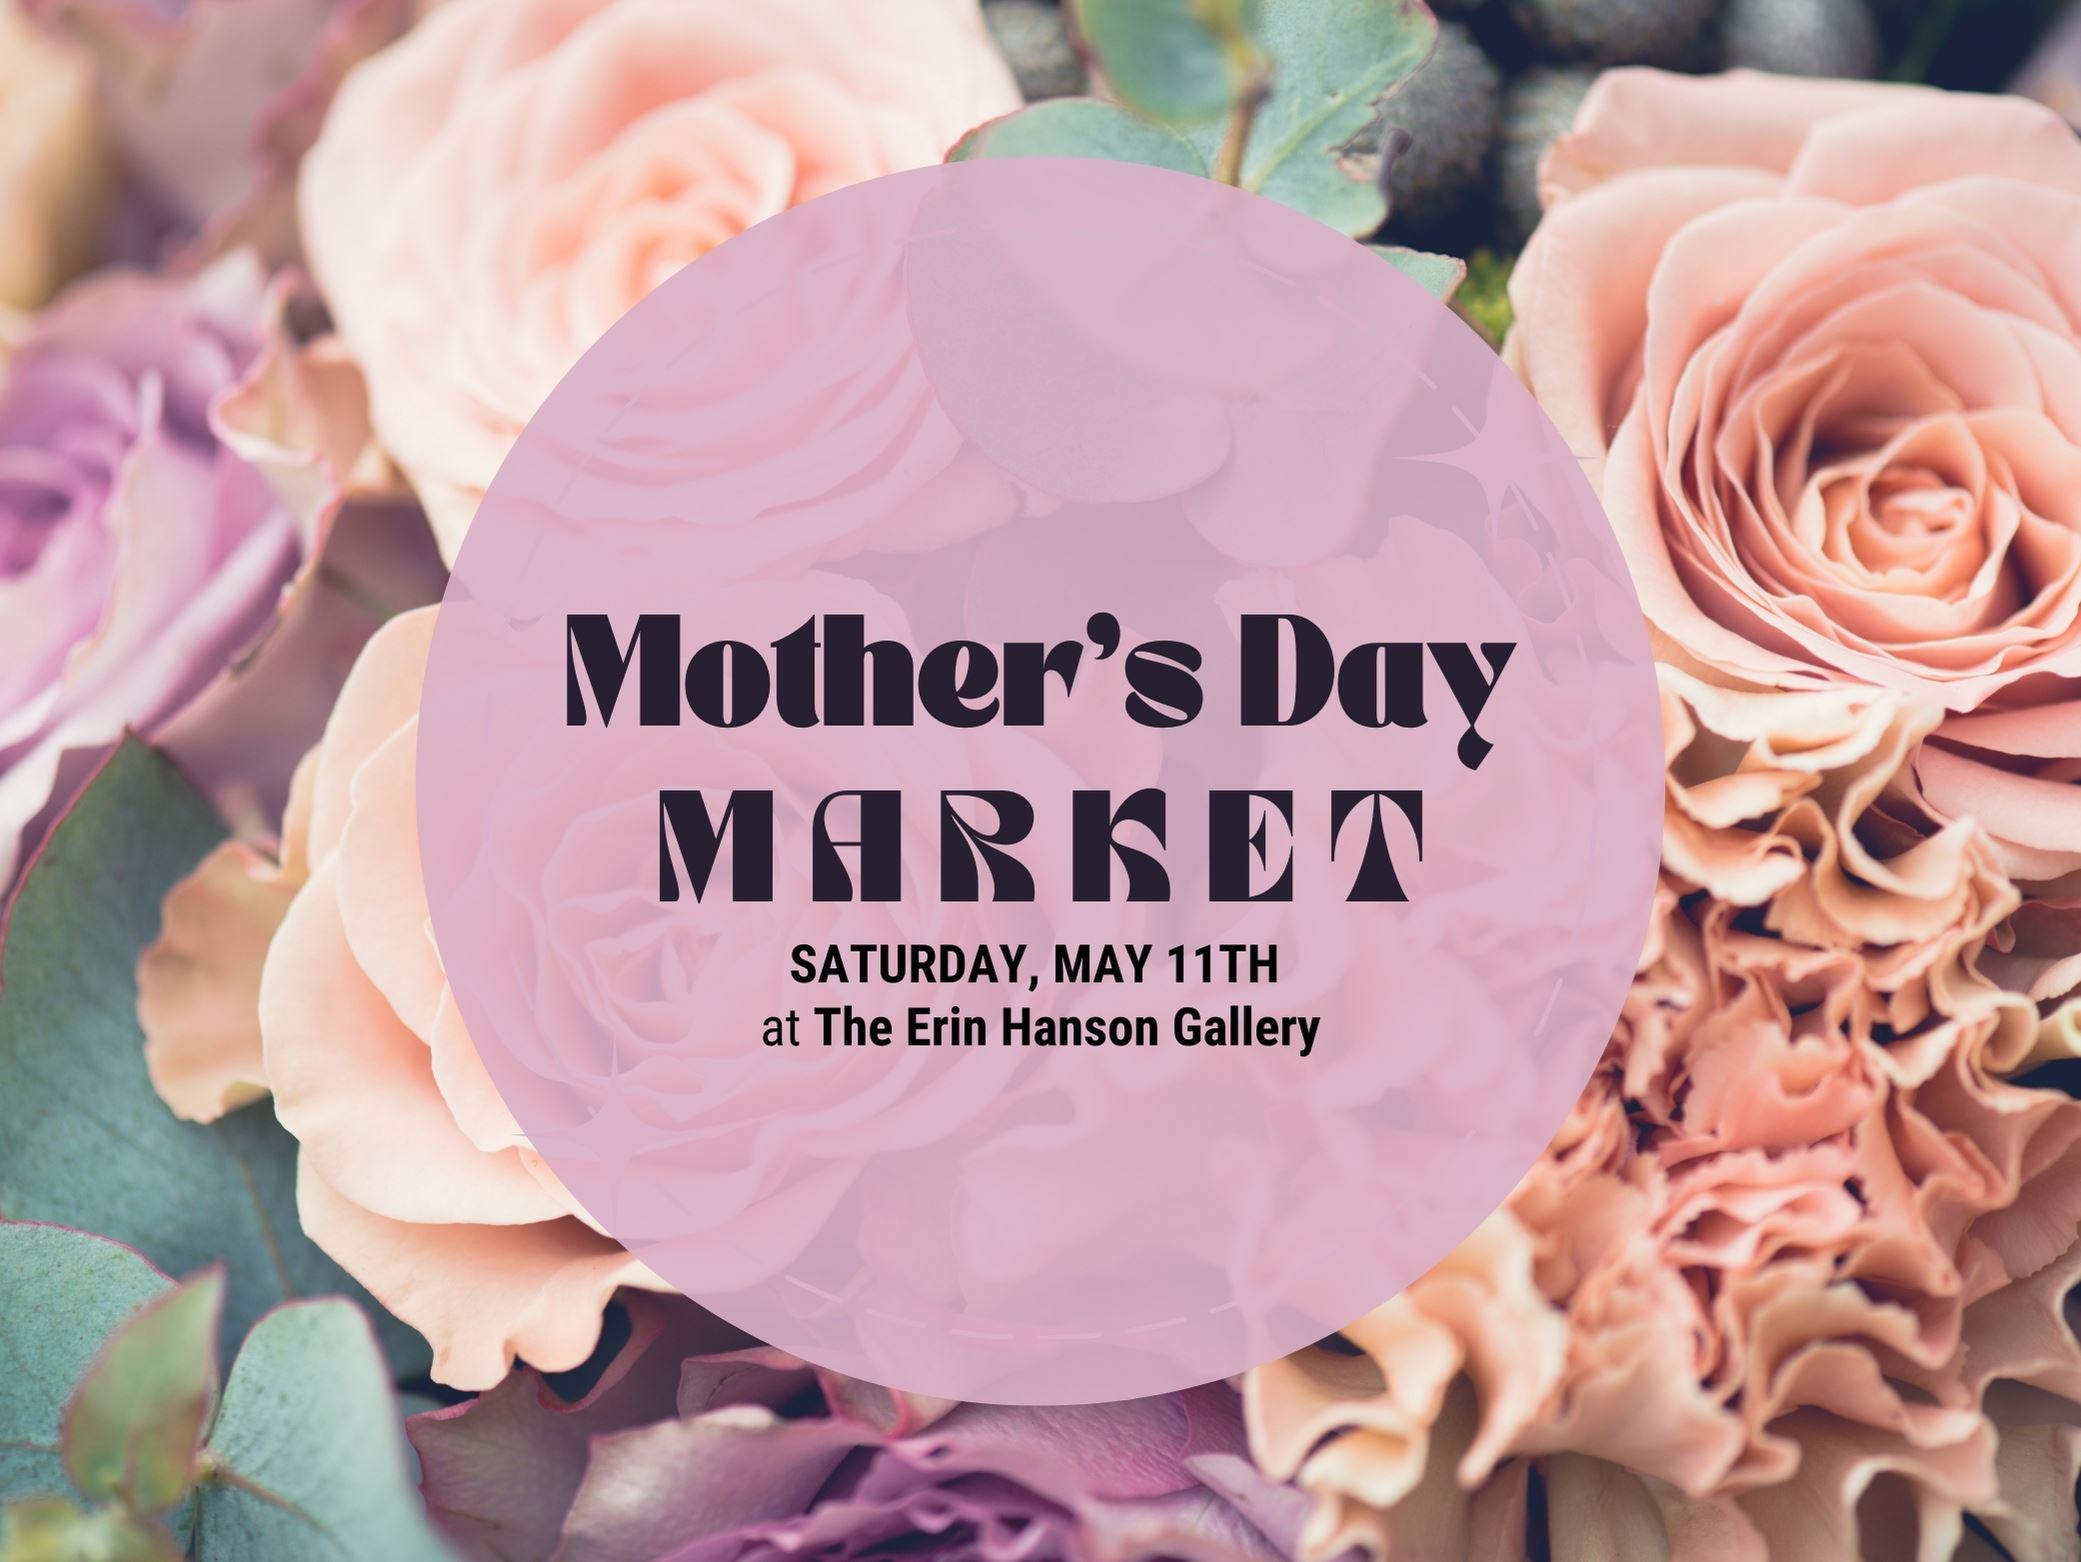 Mother's Day Market at The Erin Hanson Gallery